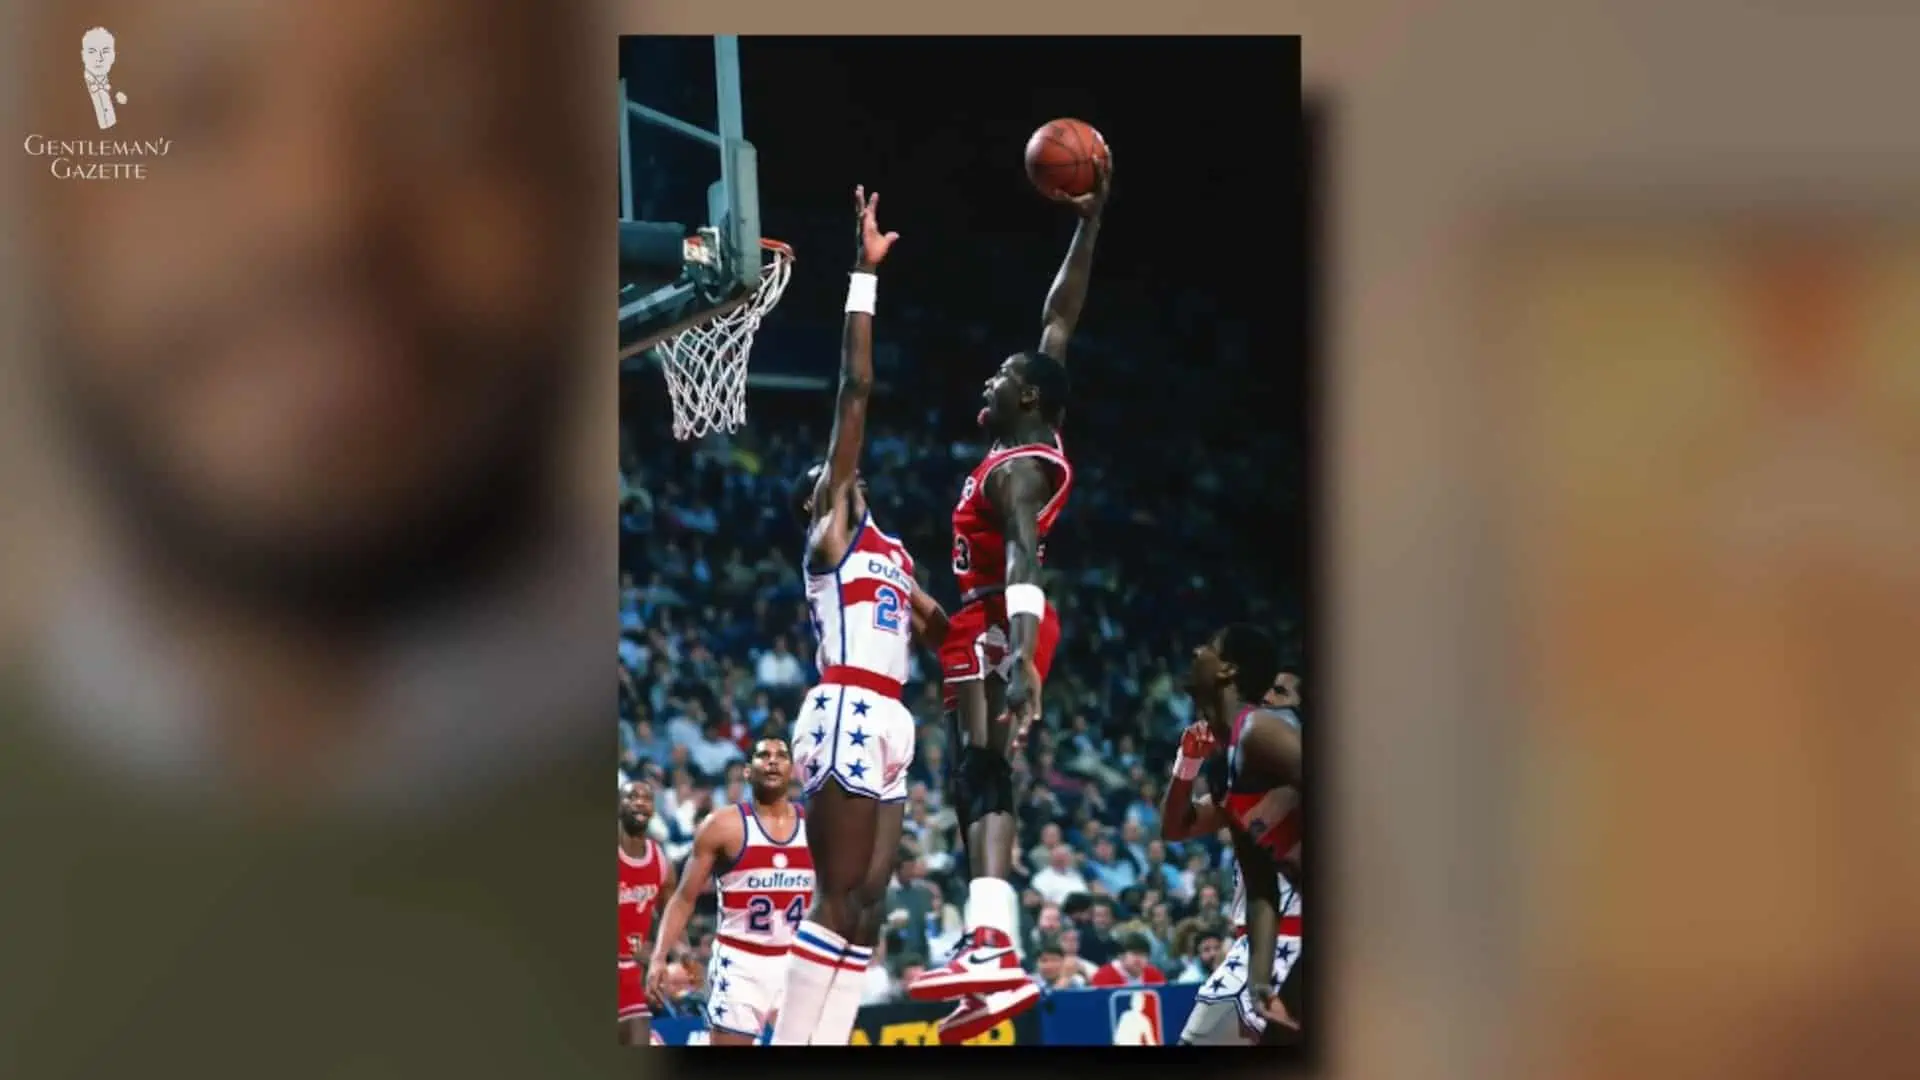 Another angle of the basketball game where Michael Jordan is wearing his Nike Air Jordans.